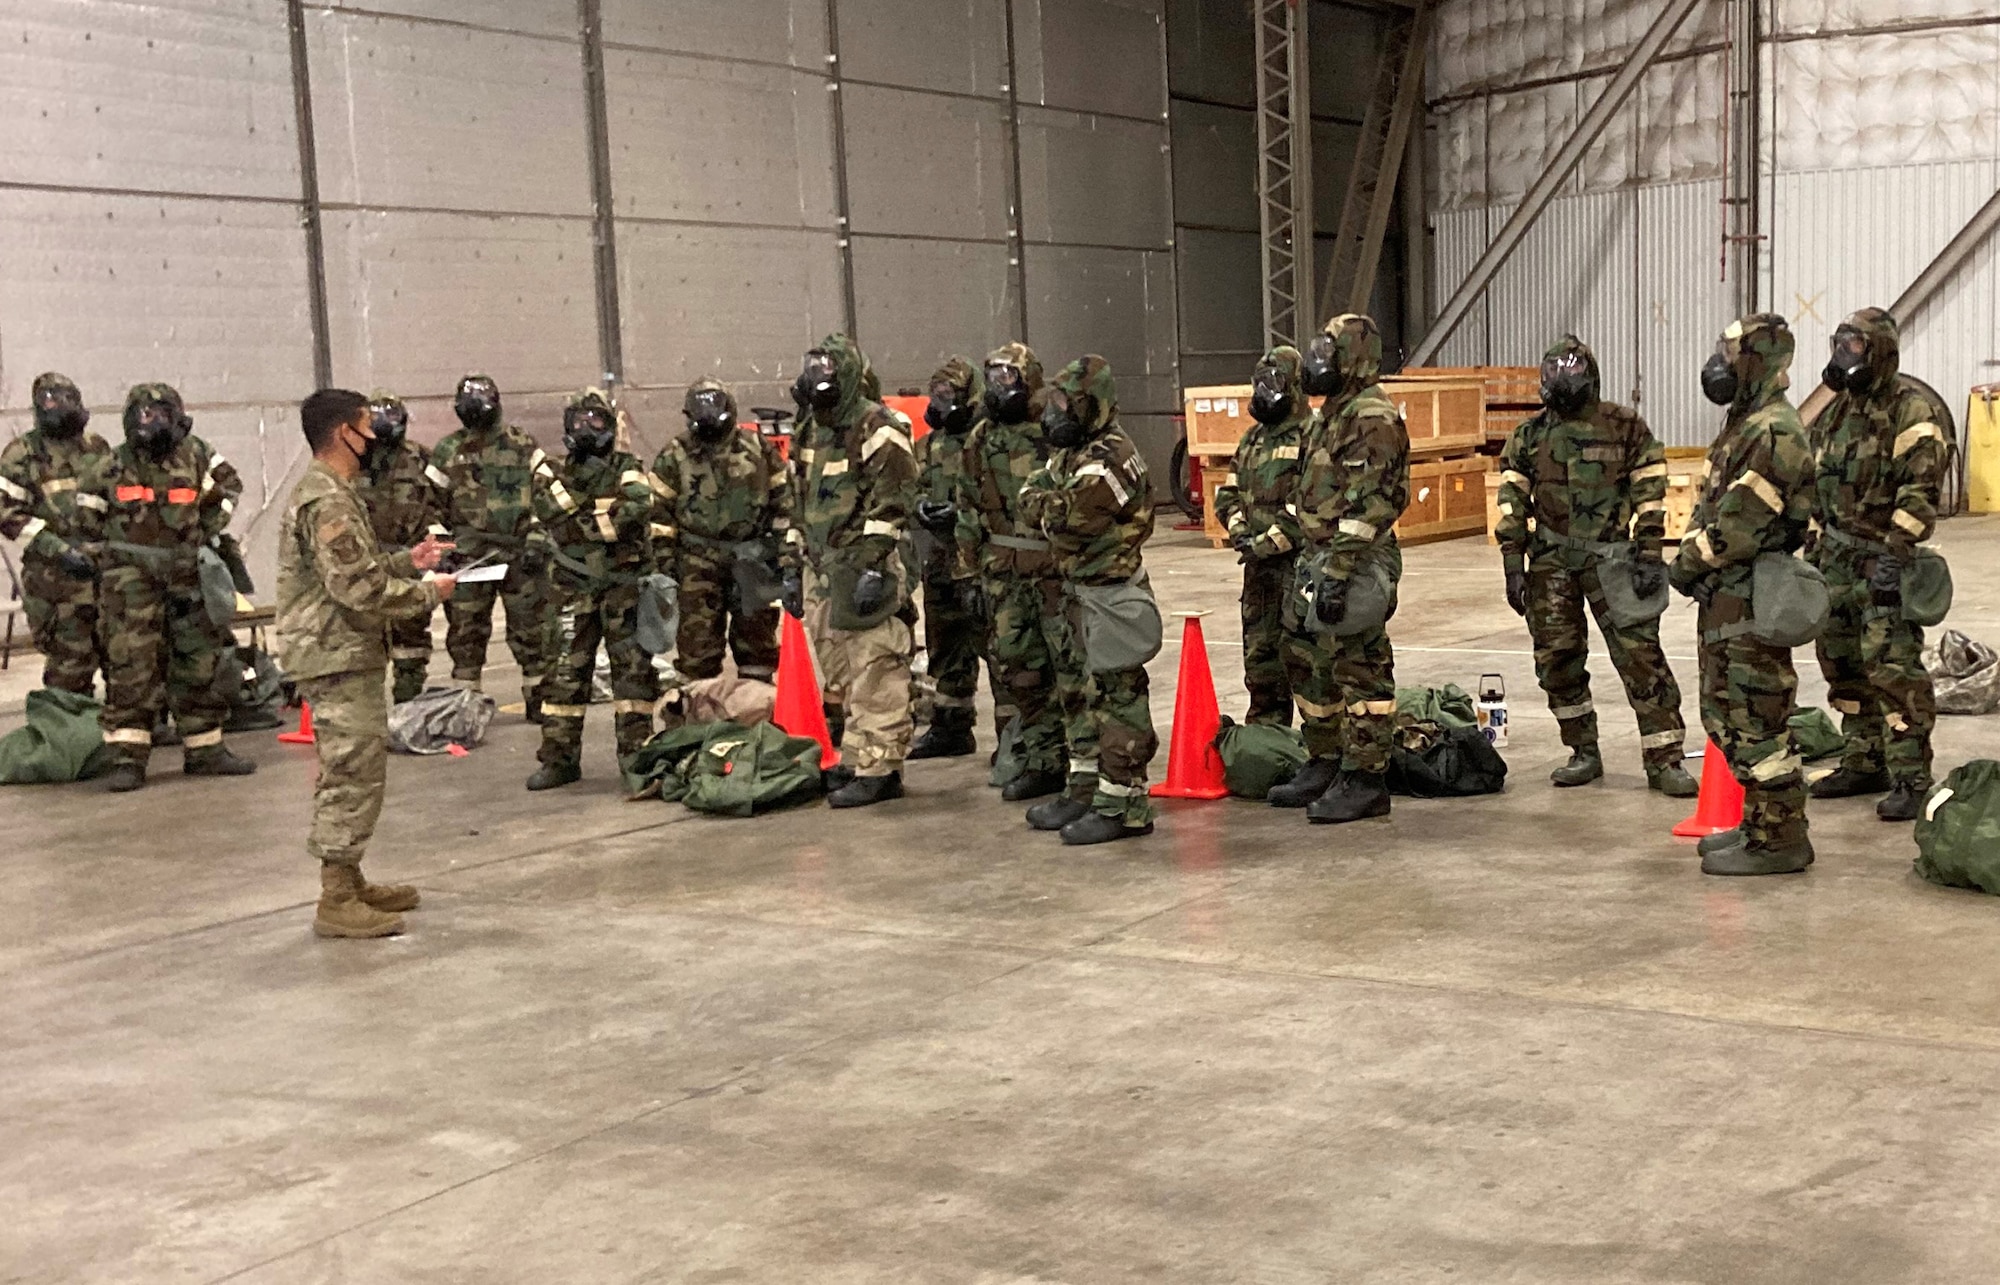 301st Fighter Wing Airmen participate in the liquid detection point portion of post-attack reconnaissance training, April 30, 2021 at Naval Air Station Joint Reserve Base Fort Worth, Texas. This training enables Airmen to learn potentially life-saving skills that can be utilized at home and abroad. (Courtesy photo)